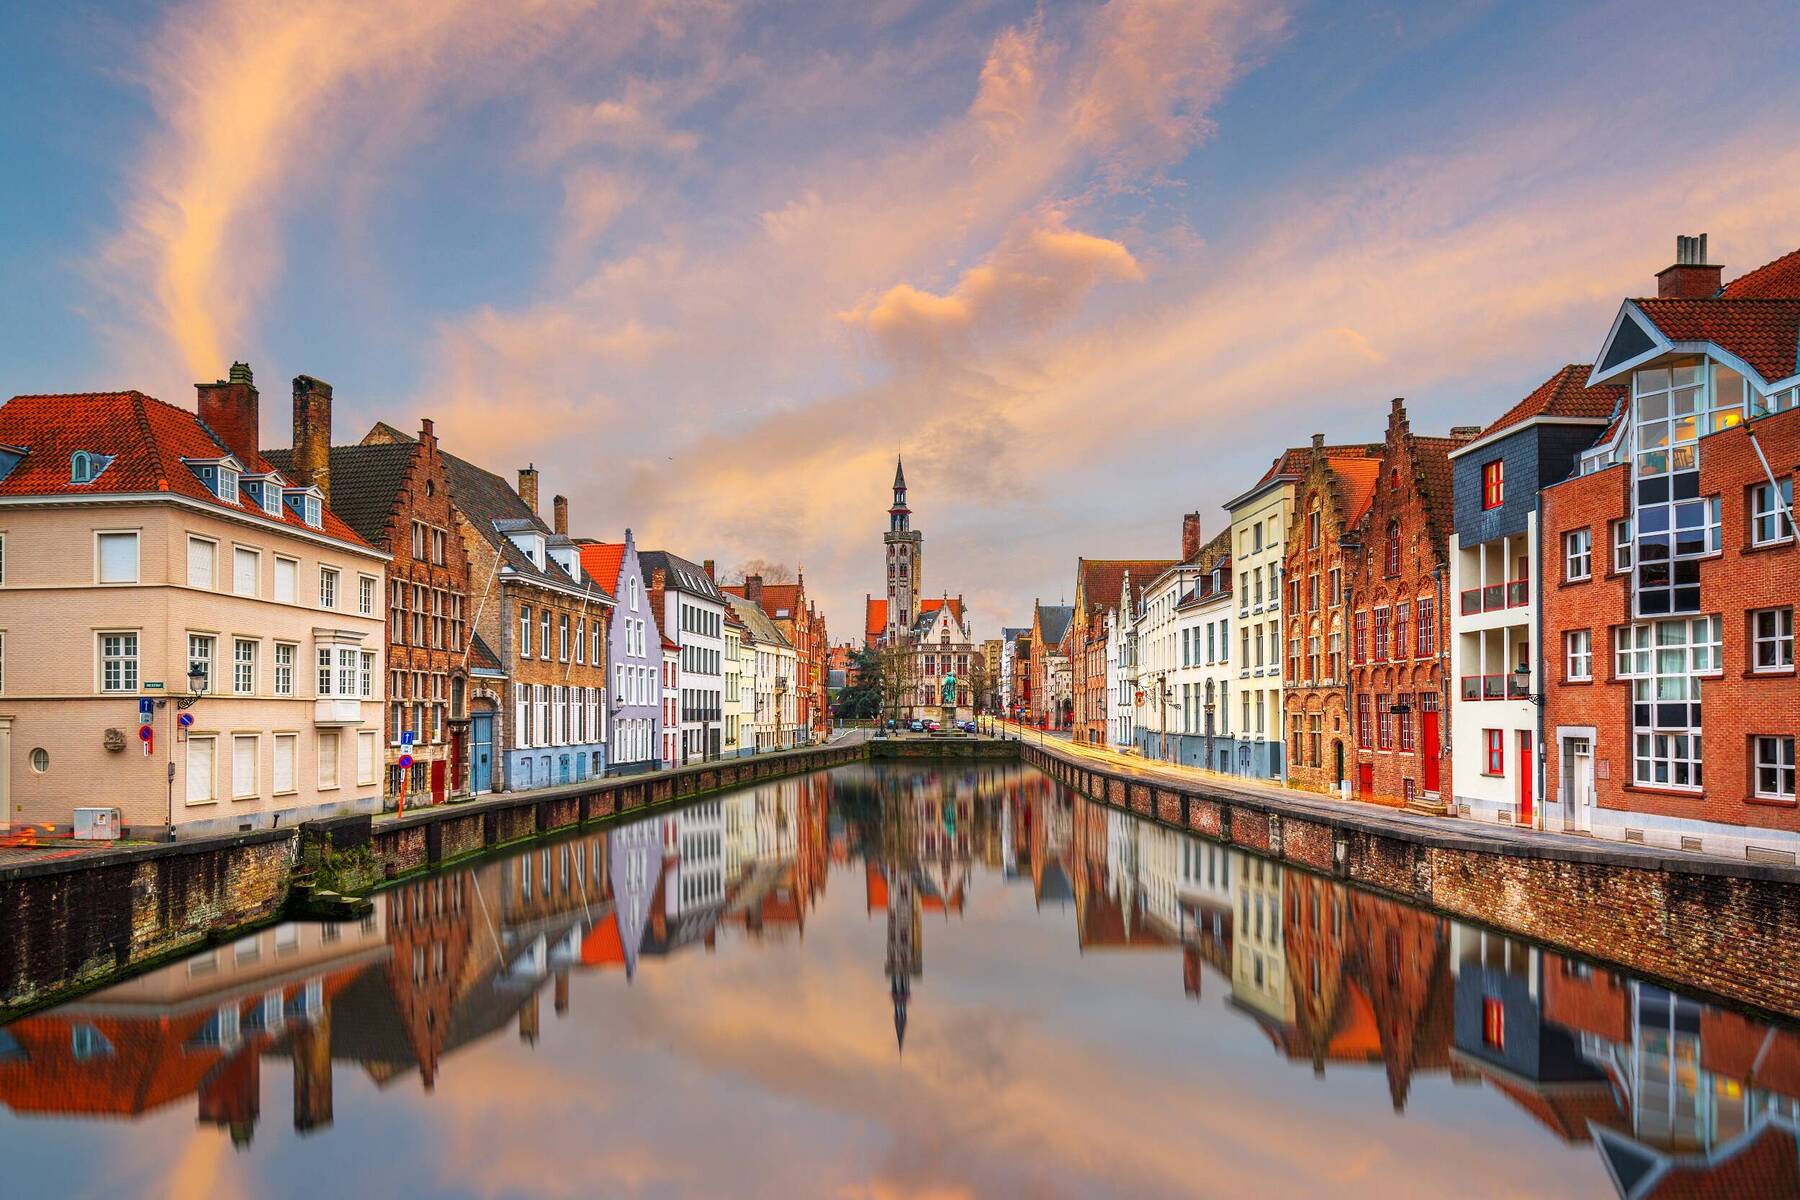 Four irresistible reasons to visit Bruges